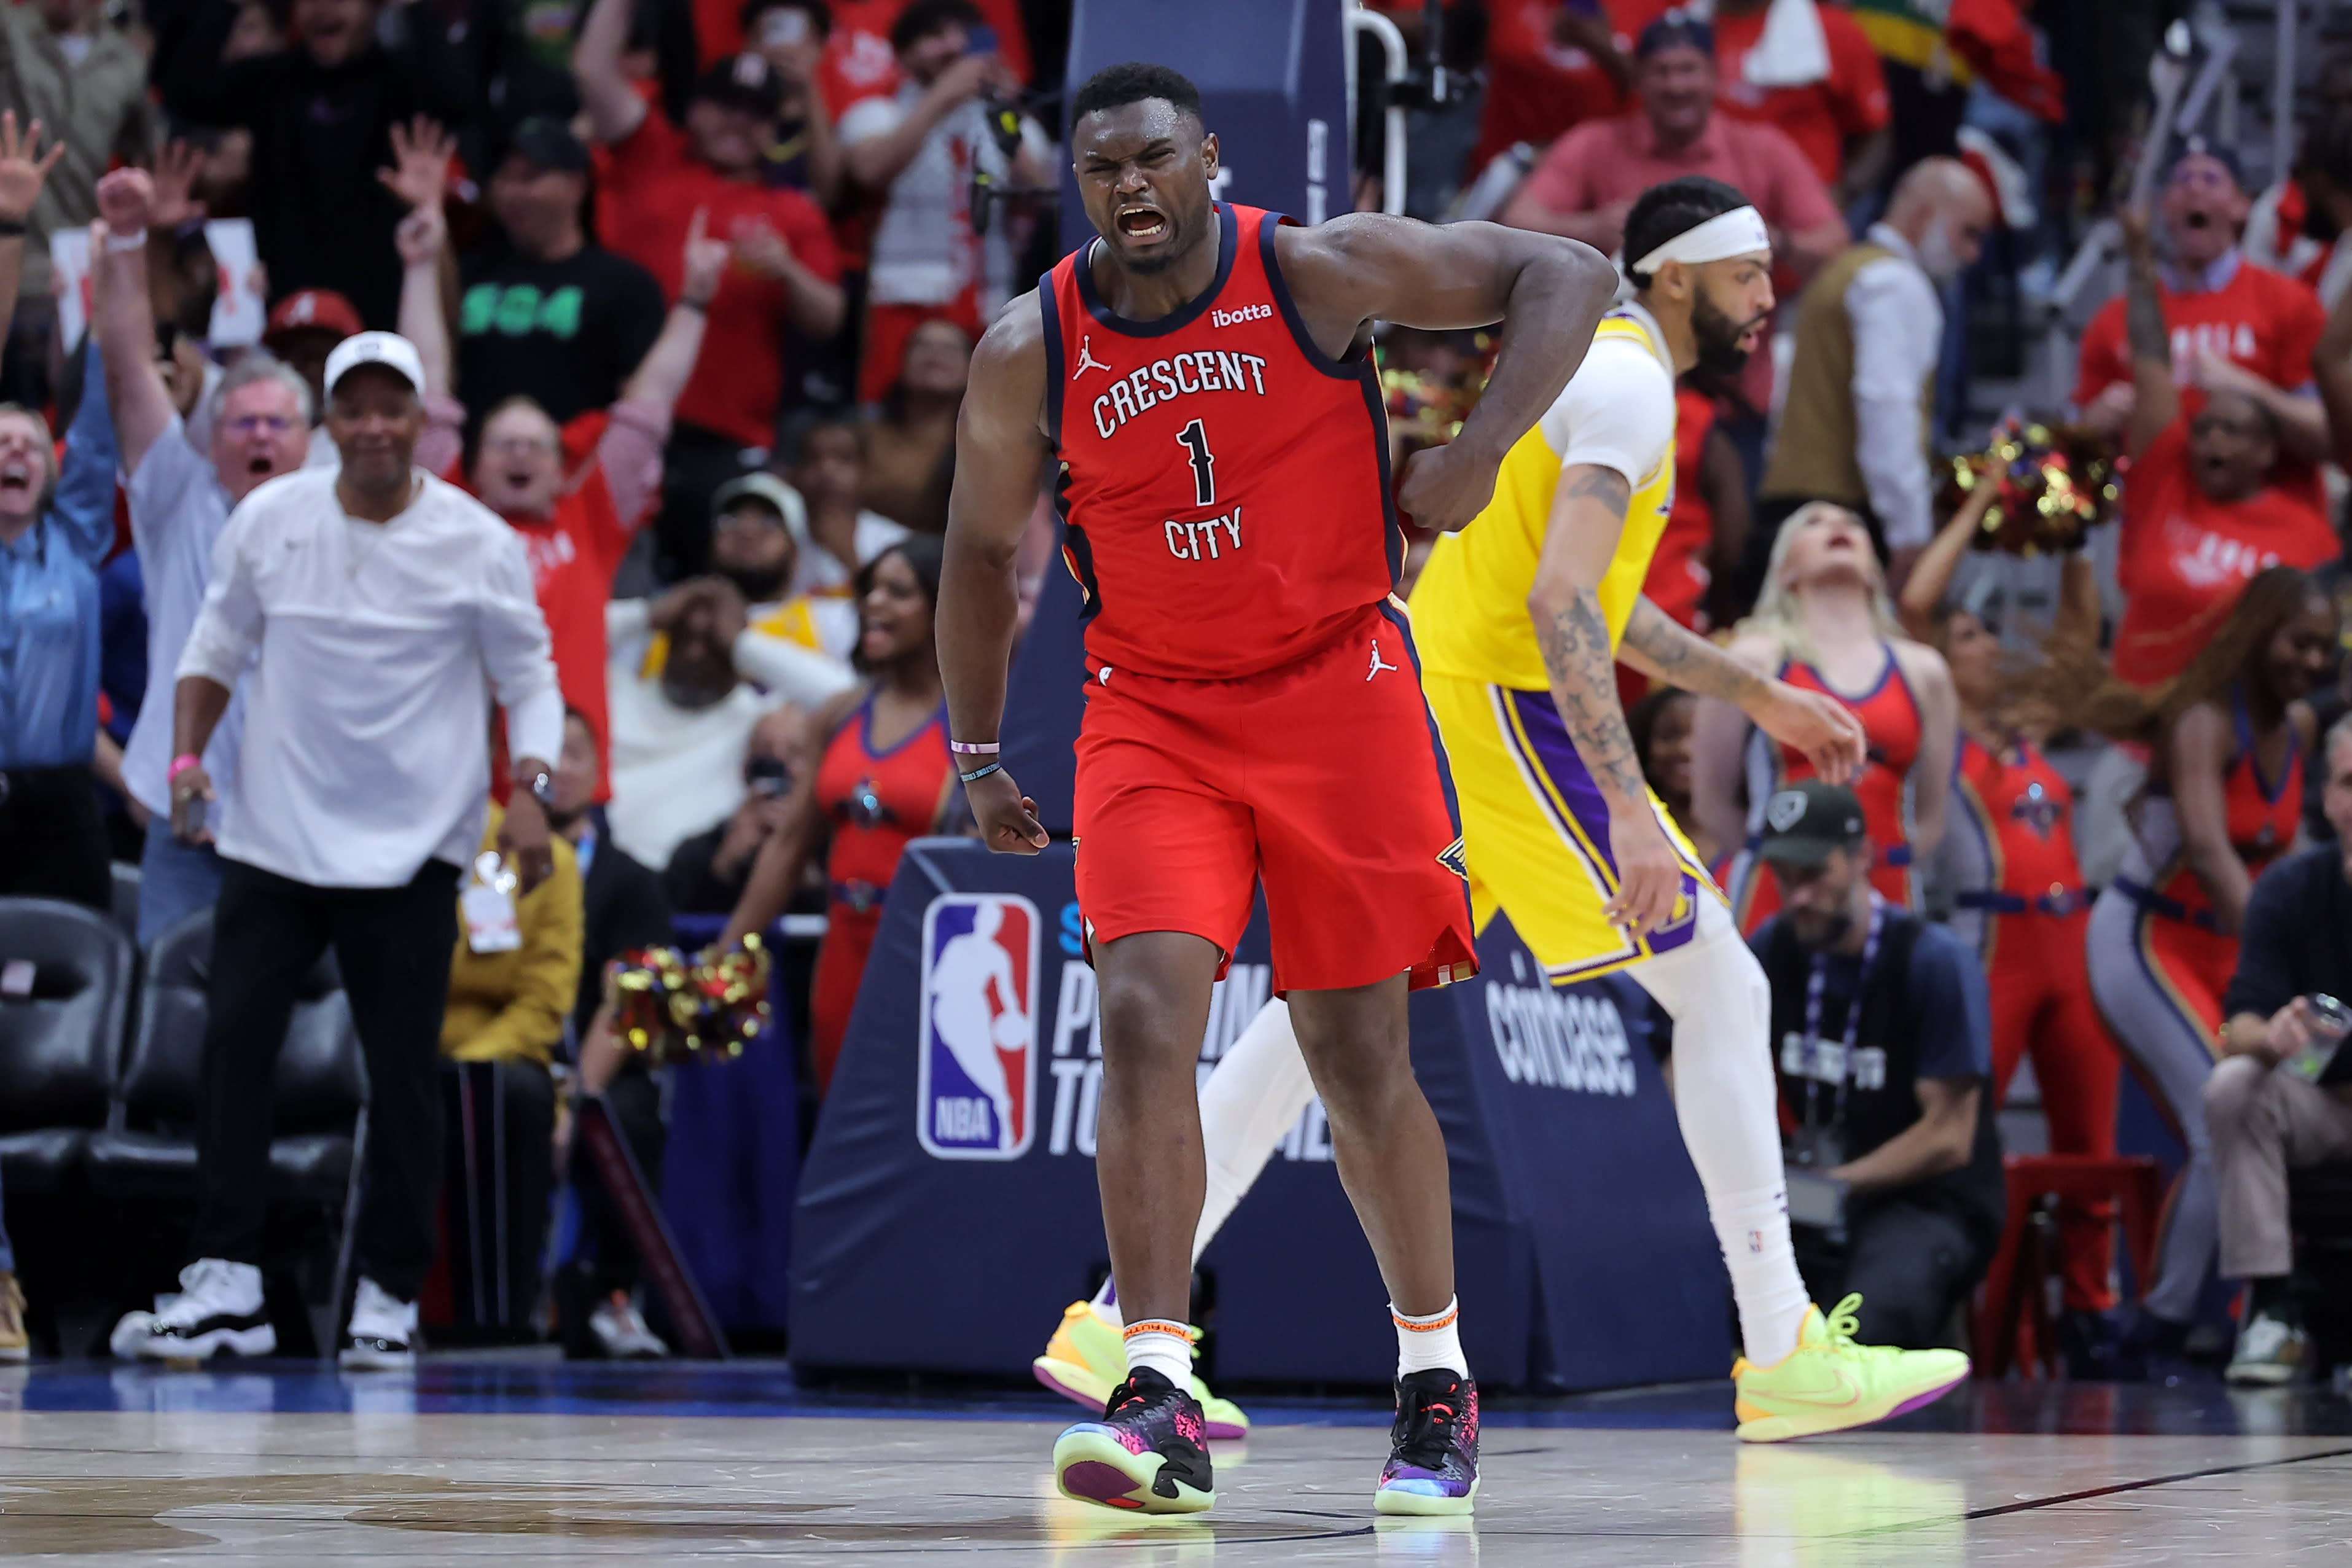 Zion Williamson won't play in Pelicans play-in game Friday because of hamstring injury